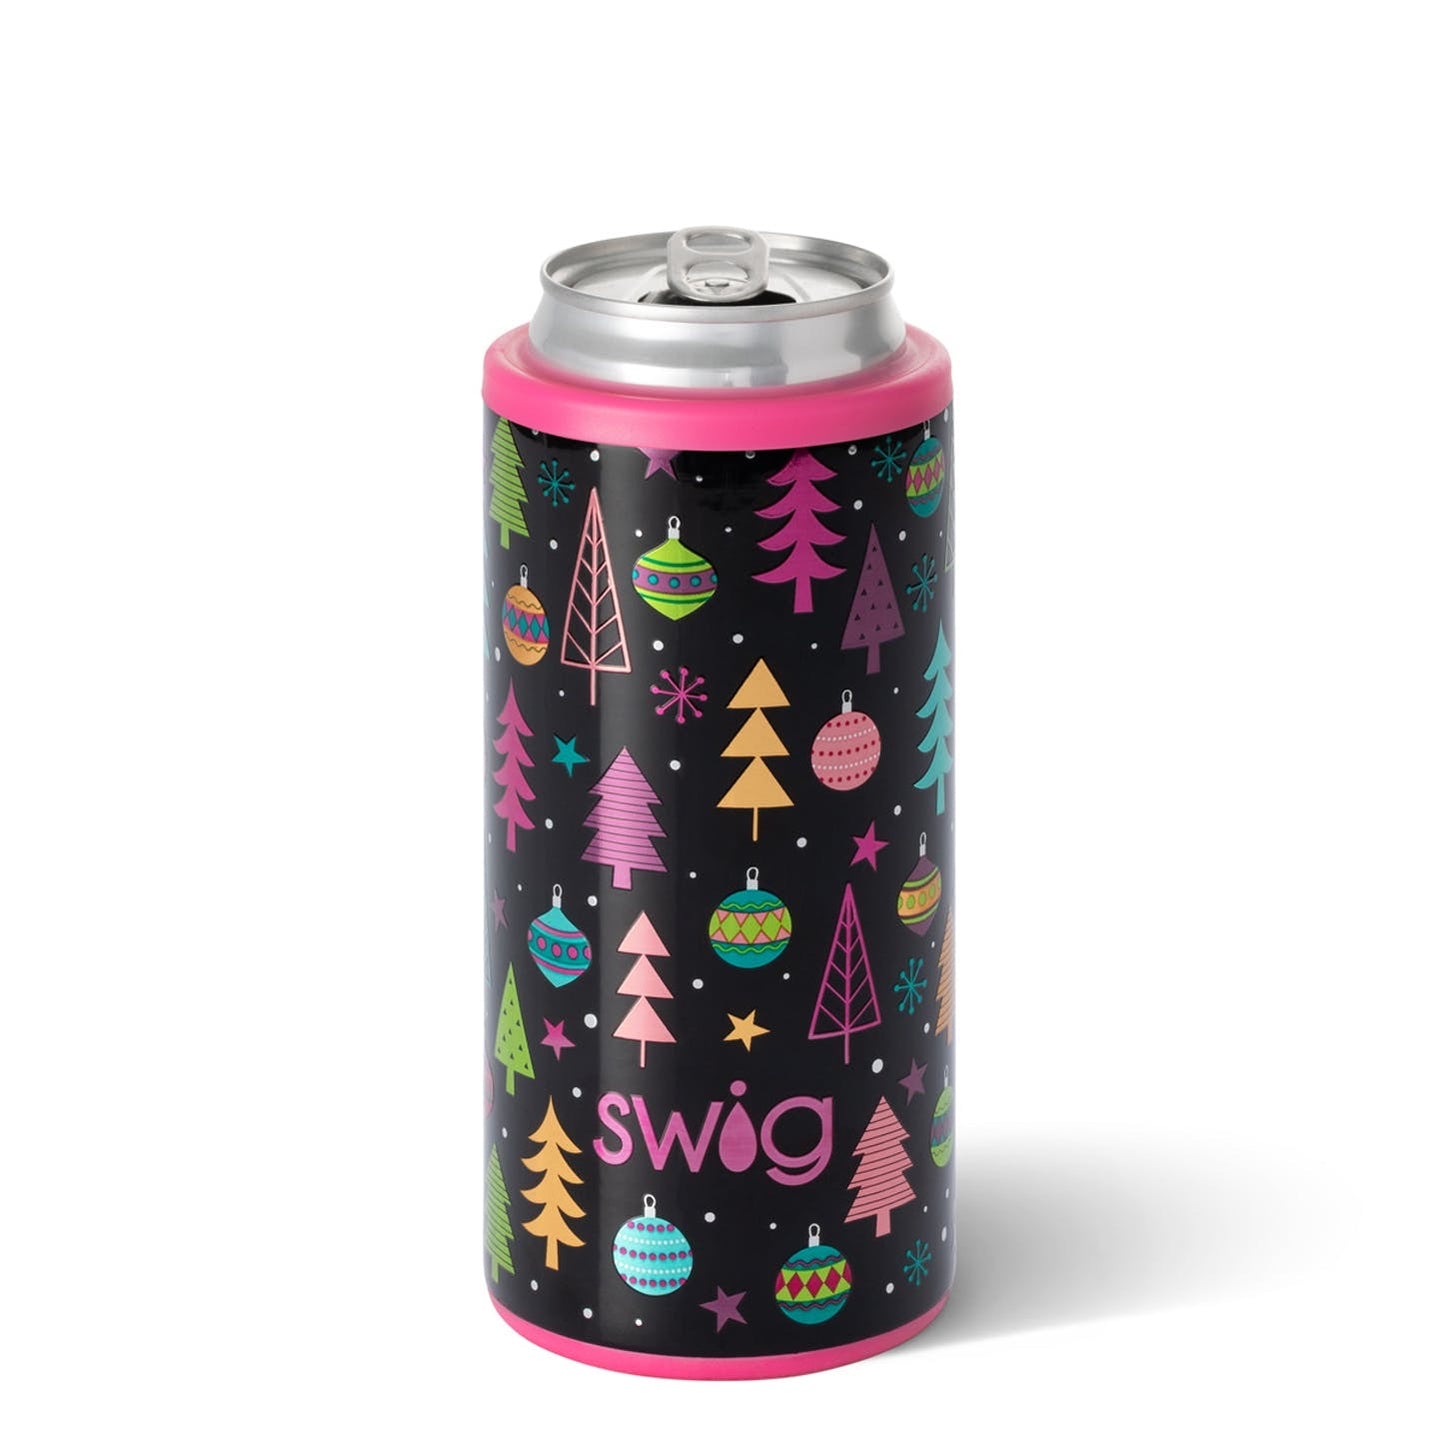 Merry and Bright 12oz Slim Can Cooler